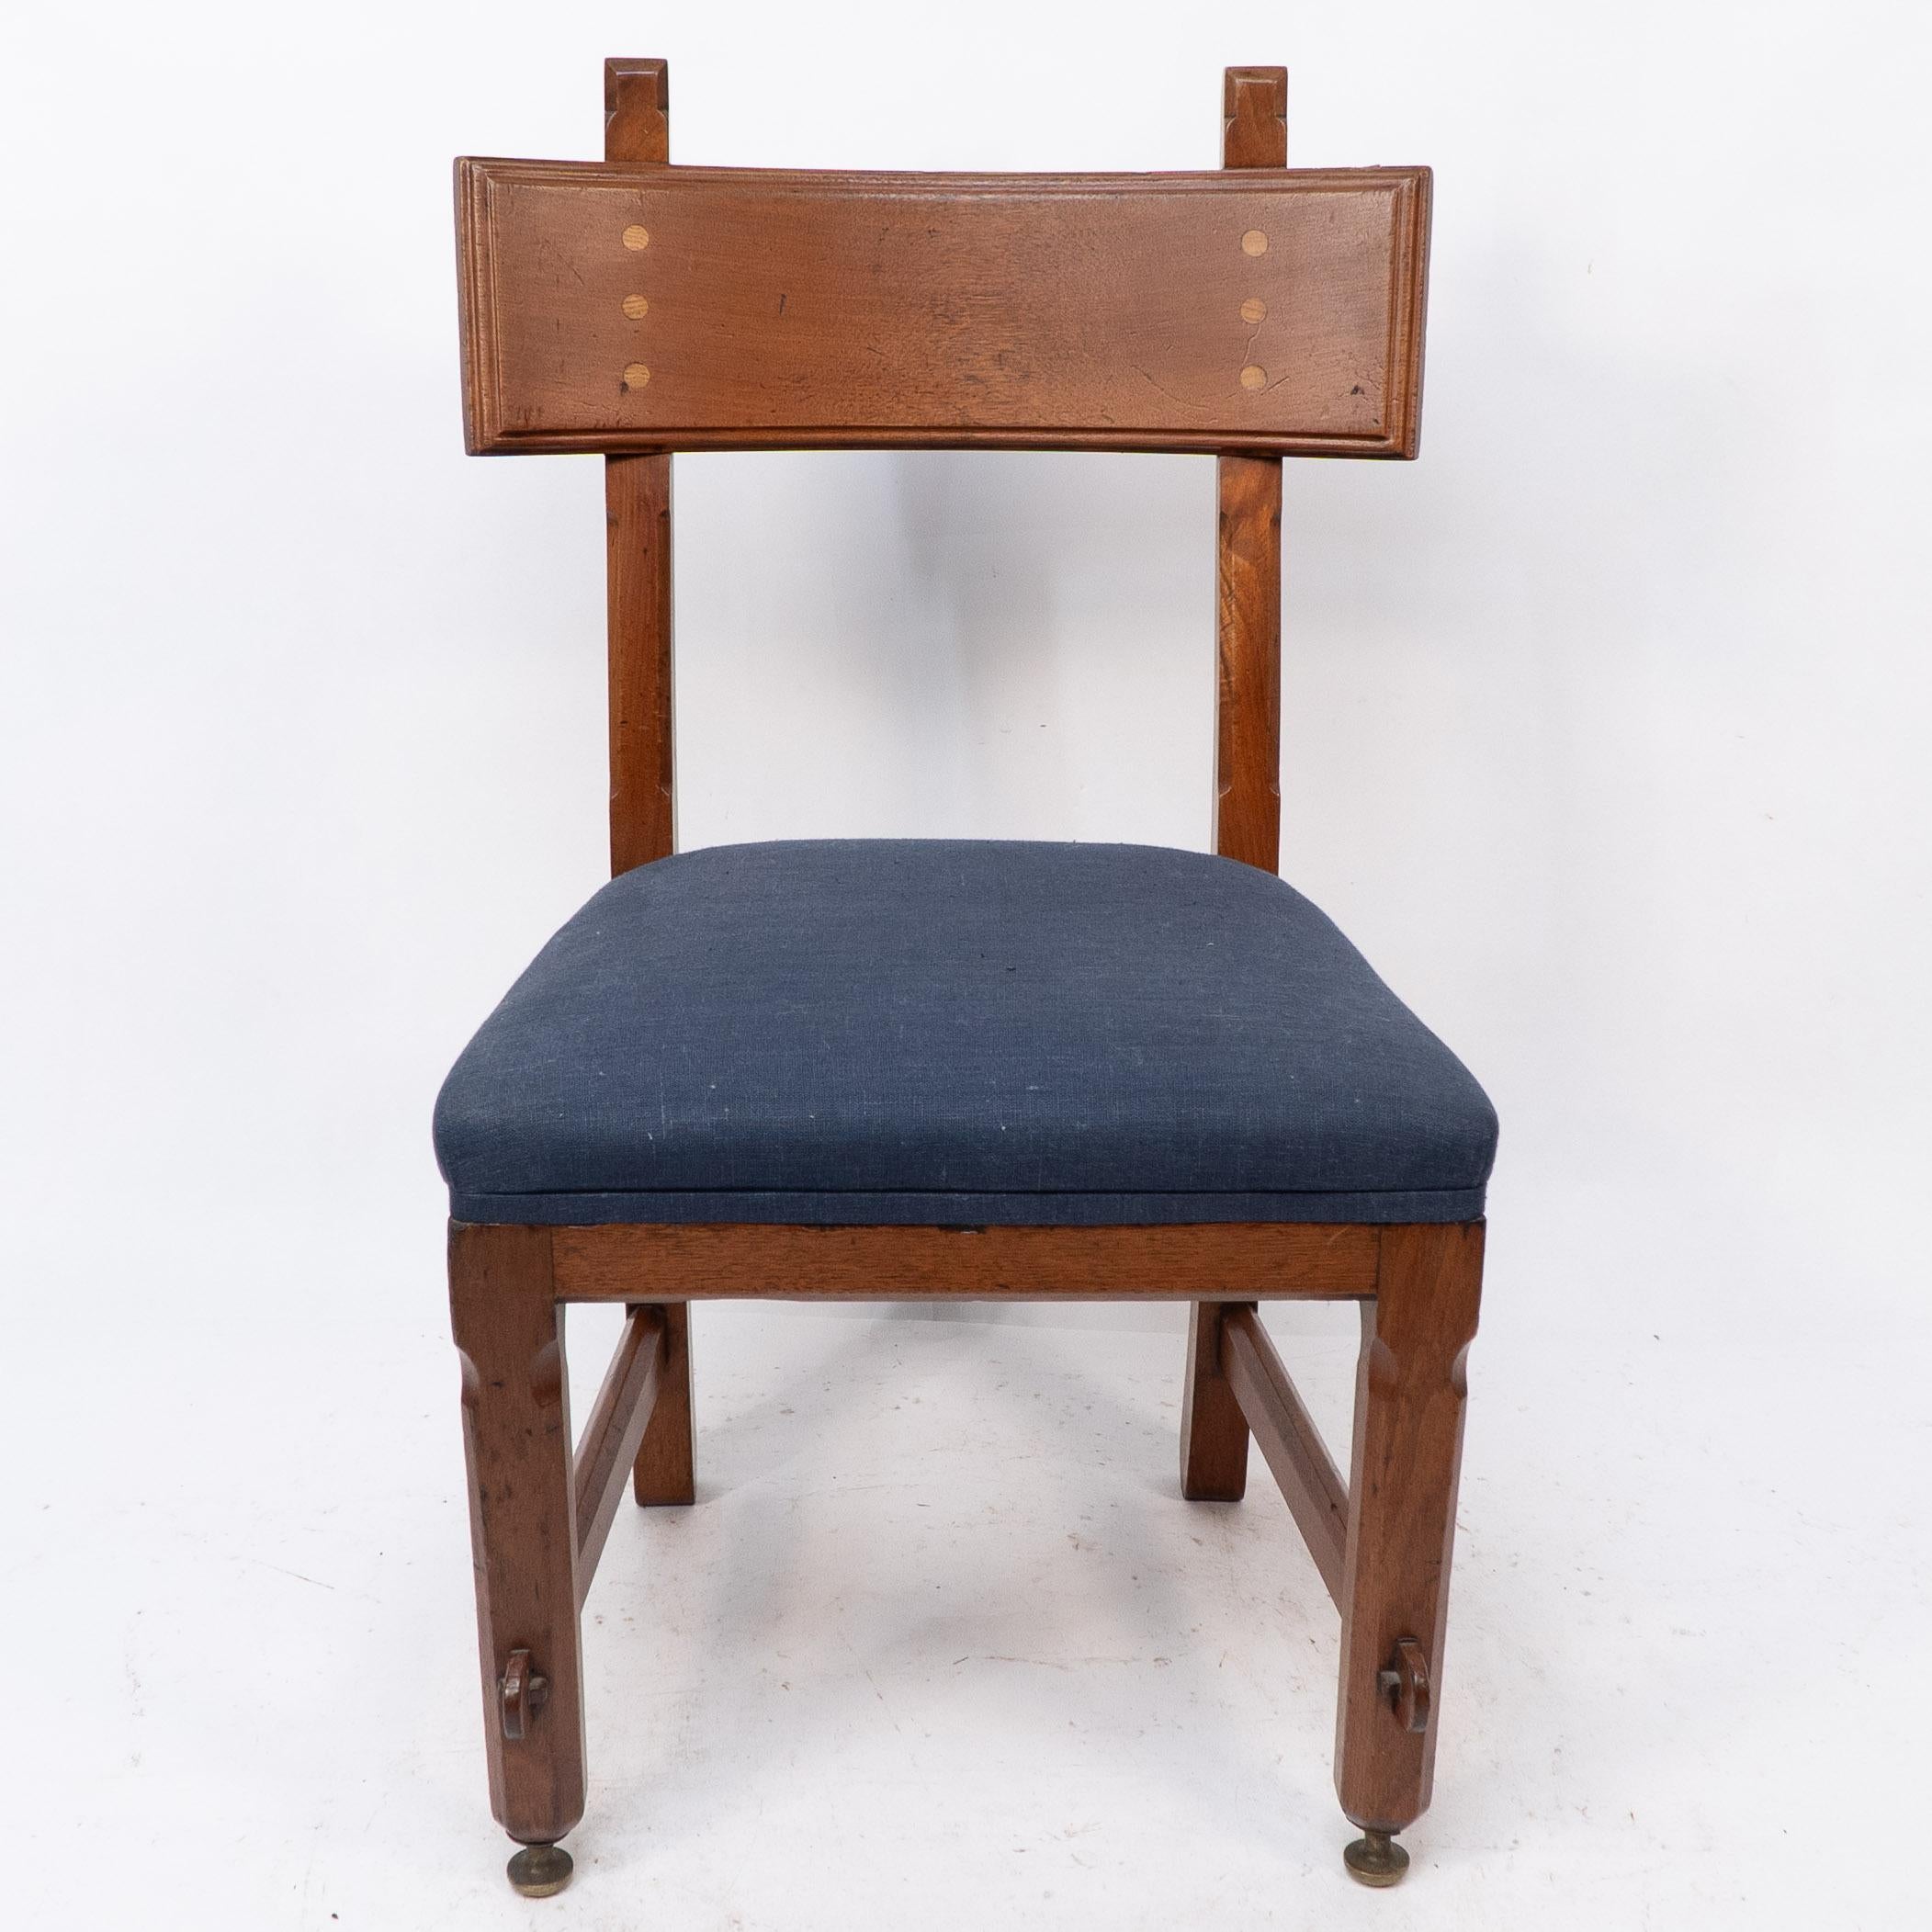 Edward William Pugin. A walnut side chair of slightly smaller proportions with curvaceous back rest, oak pegs and through tenon joints with pegged ends. Stood on brass mushroom shoes to the front legs.